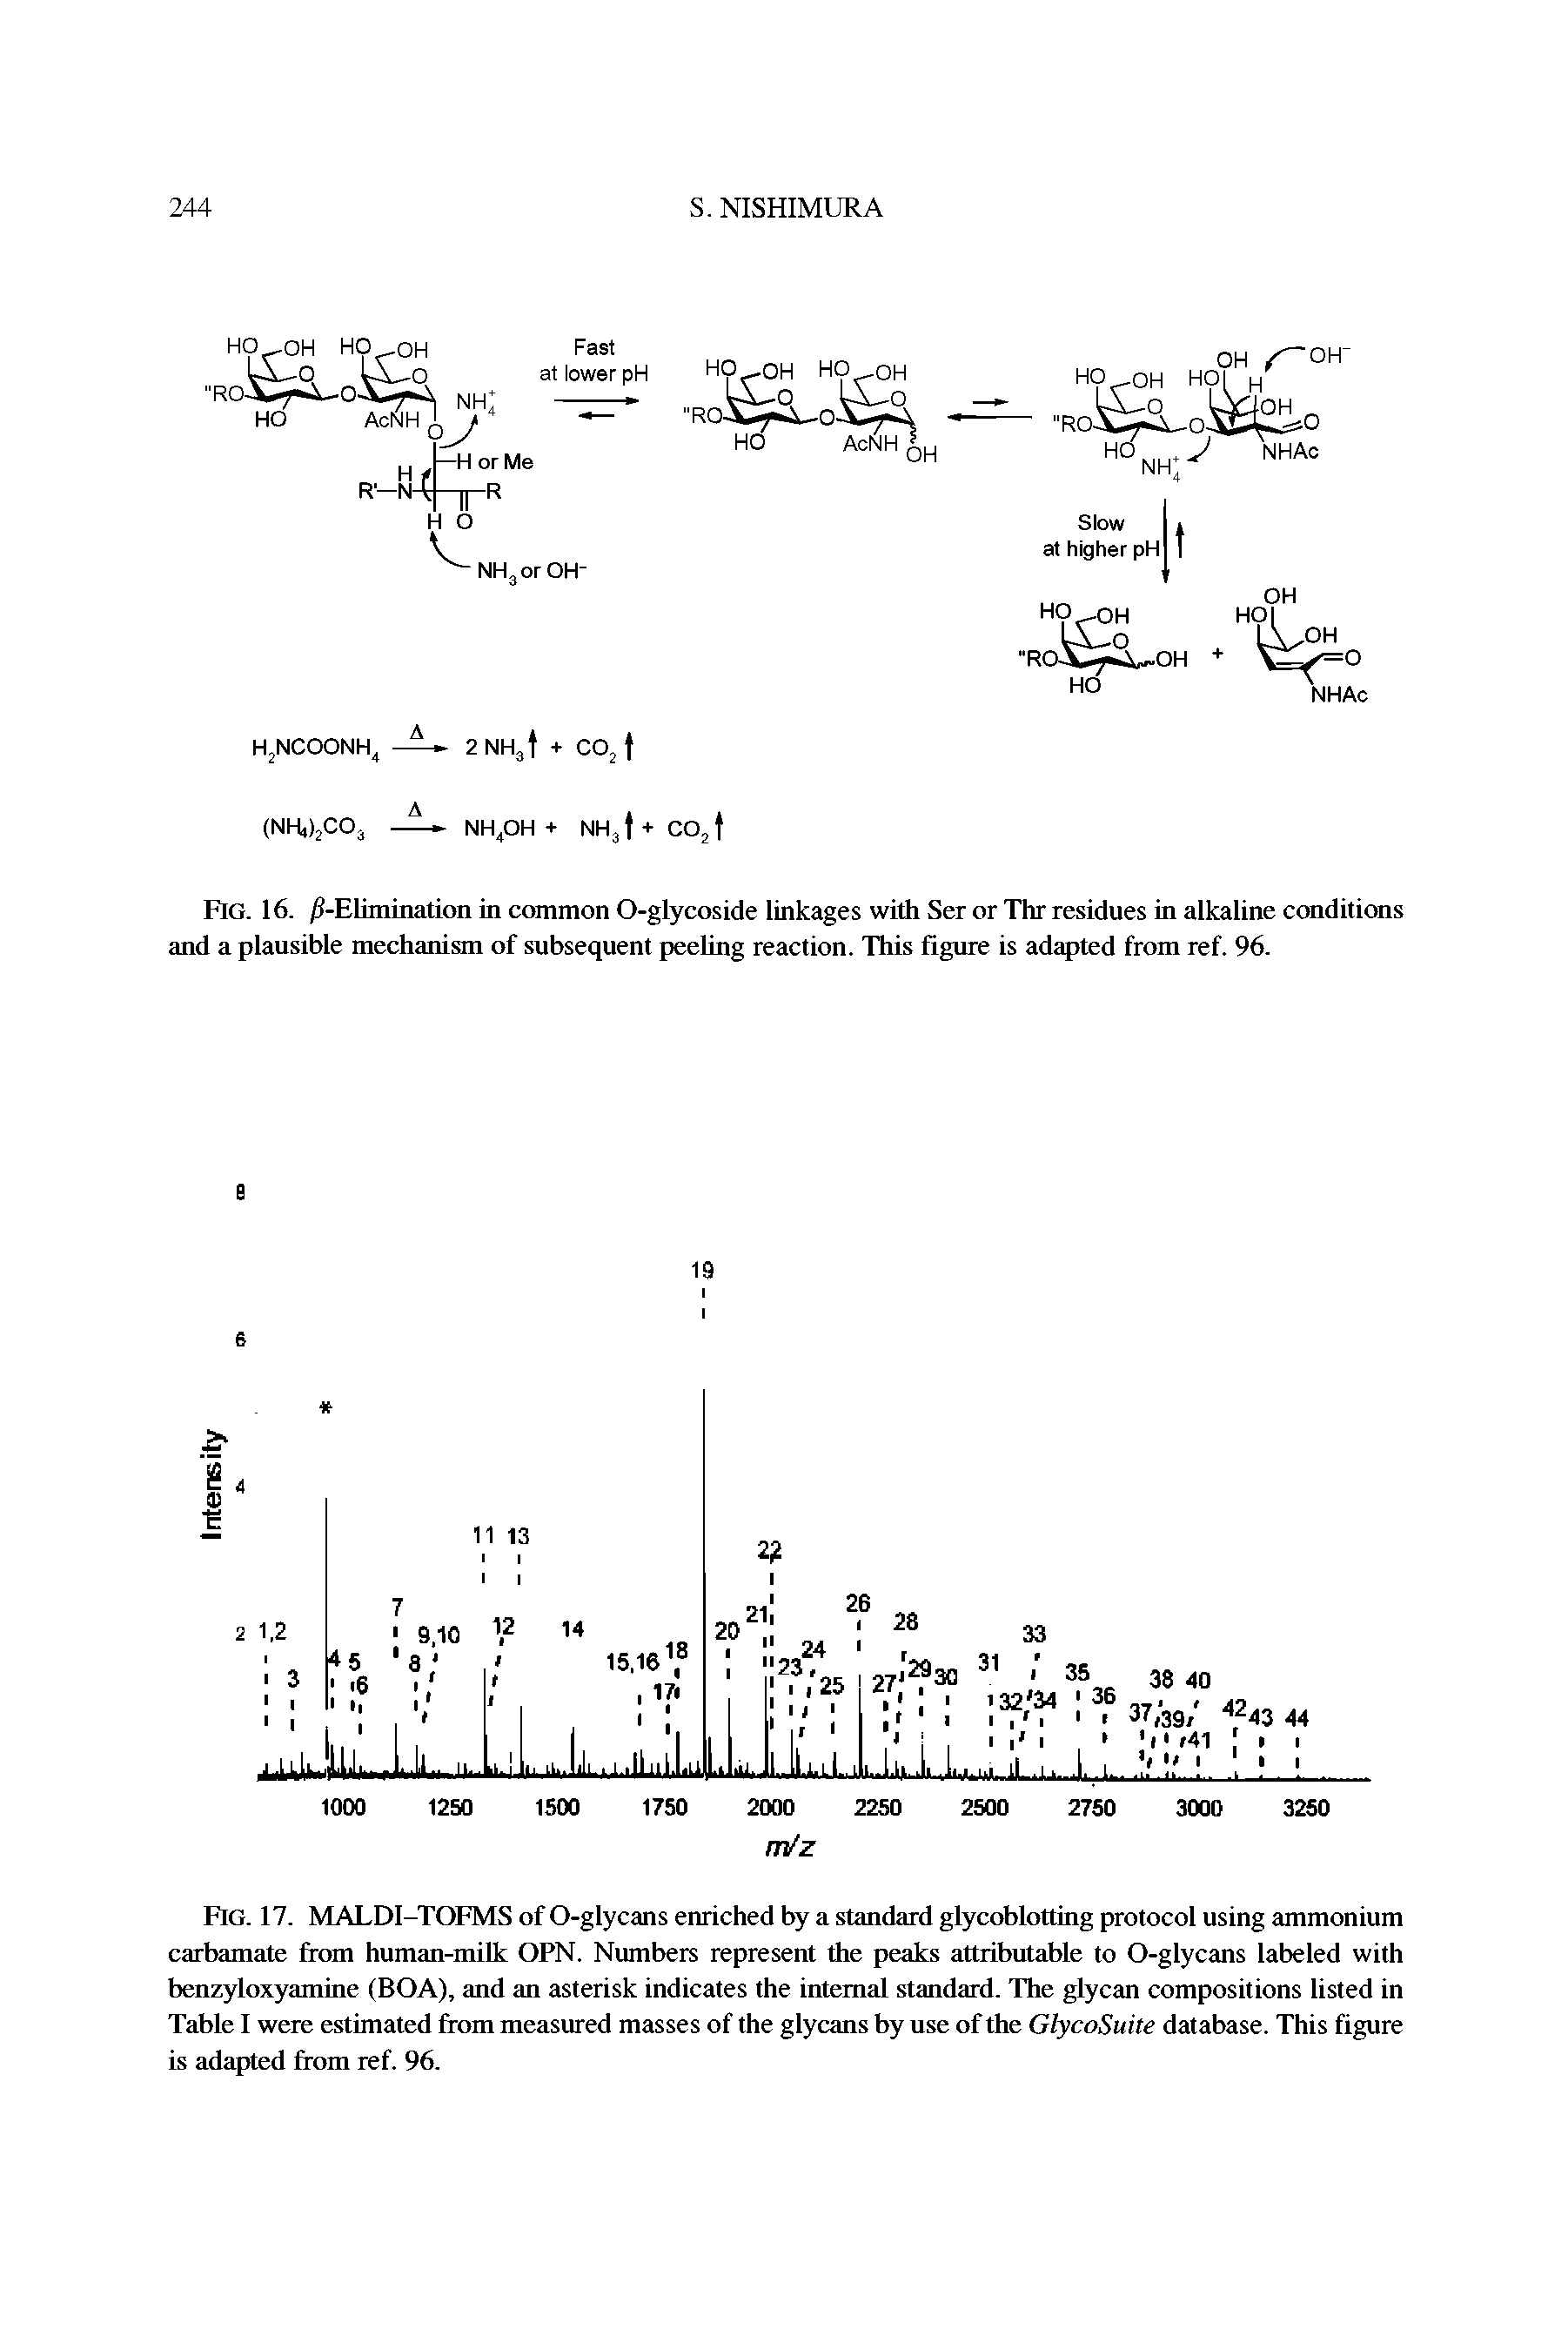 Fig. 16. -Elimination in common O-glycoside linkages with Ser or Thr residues in alkaline conditions and a plausible mechanism of subsequent peeling reaction. This figure is adapted from ref. 96.